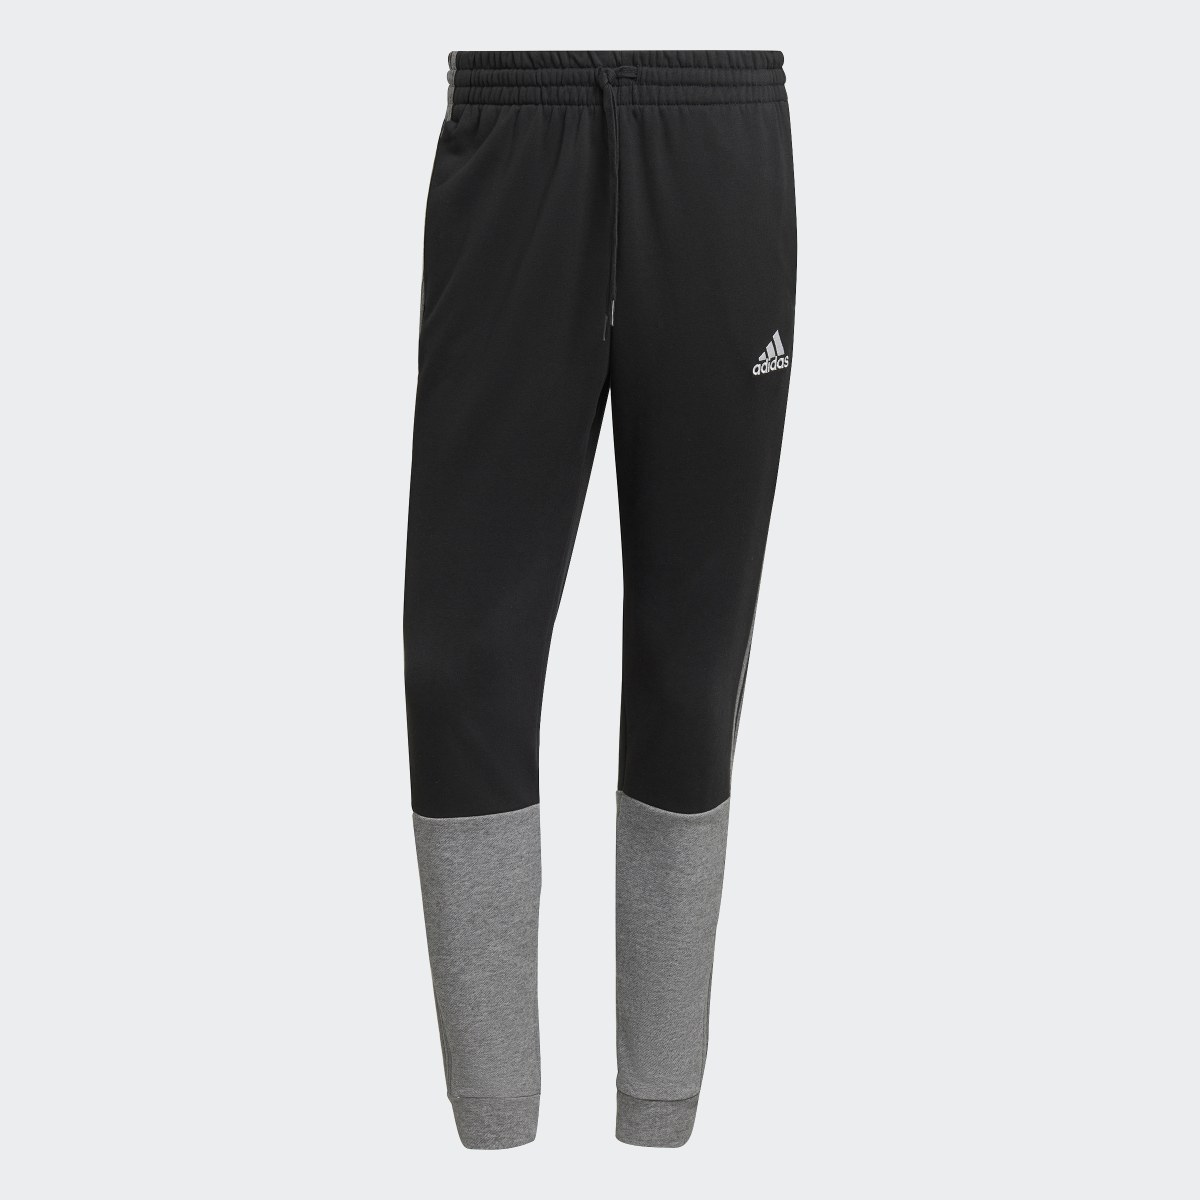 Adidas Essentials Mélange French Terry Pants. 4